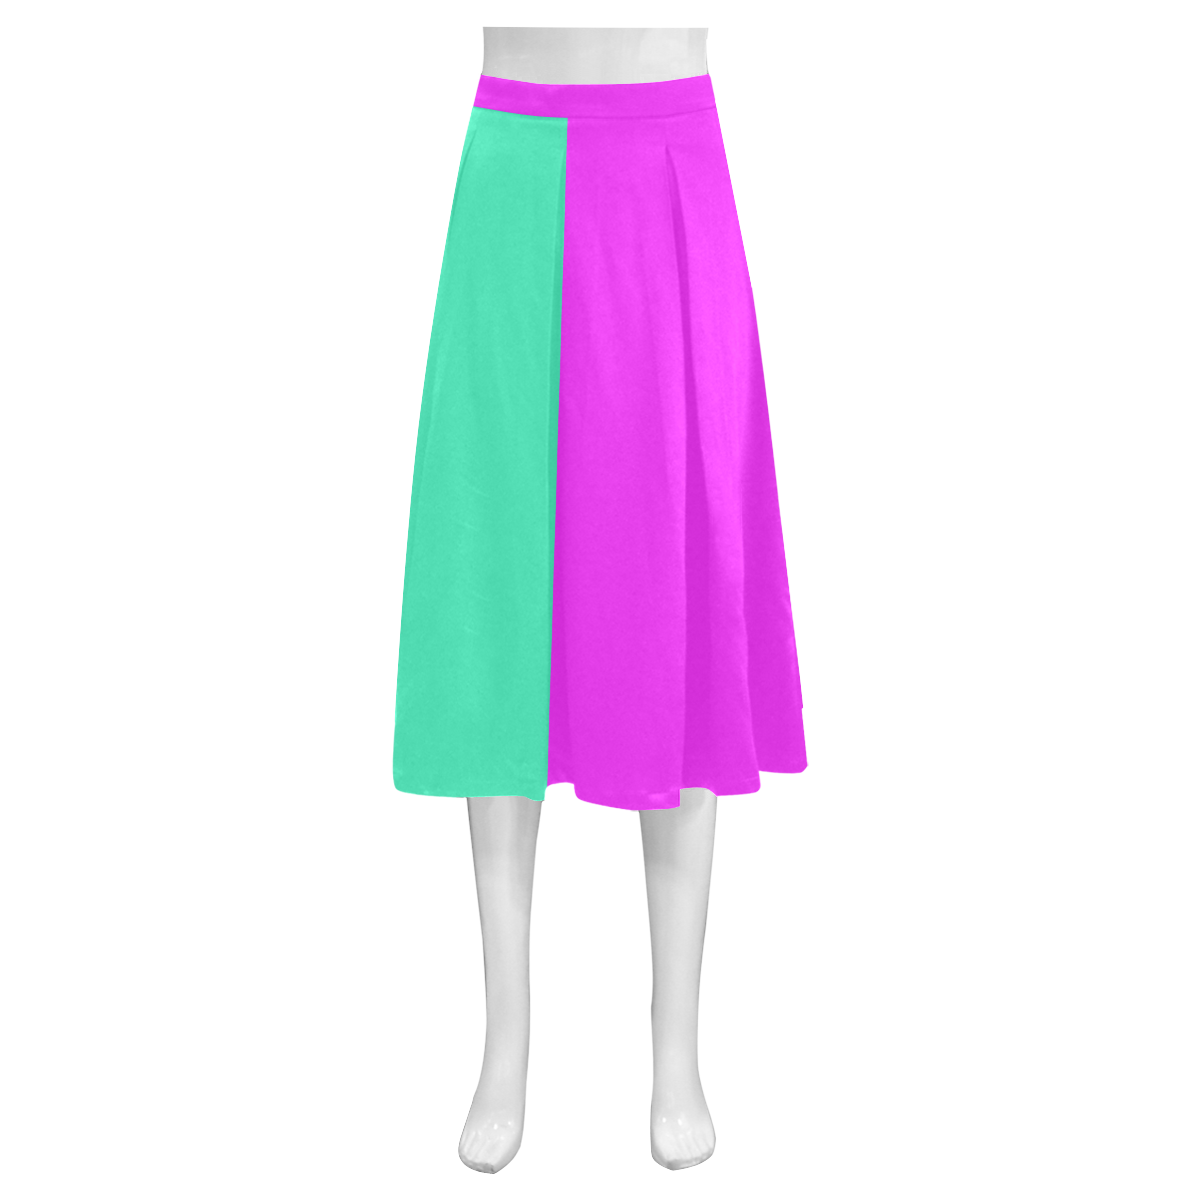 Only two Colors: Pink - Light Ocean Green Mnemosyne Women's Crepe Skirt (Model D16)